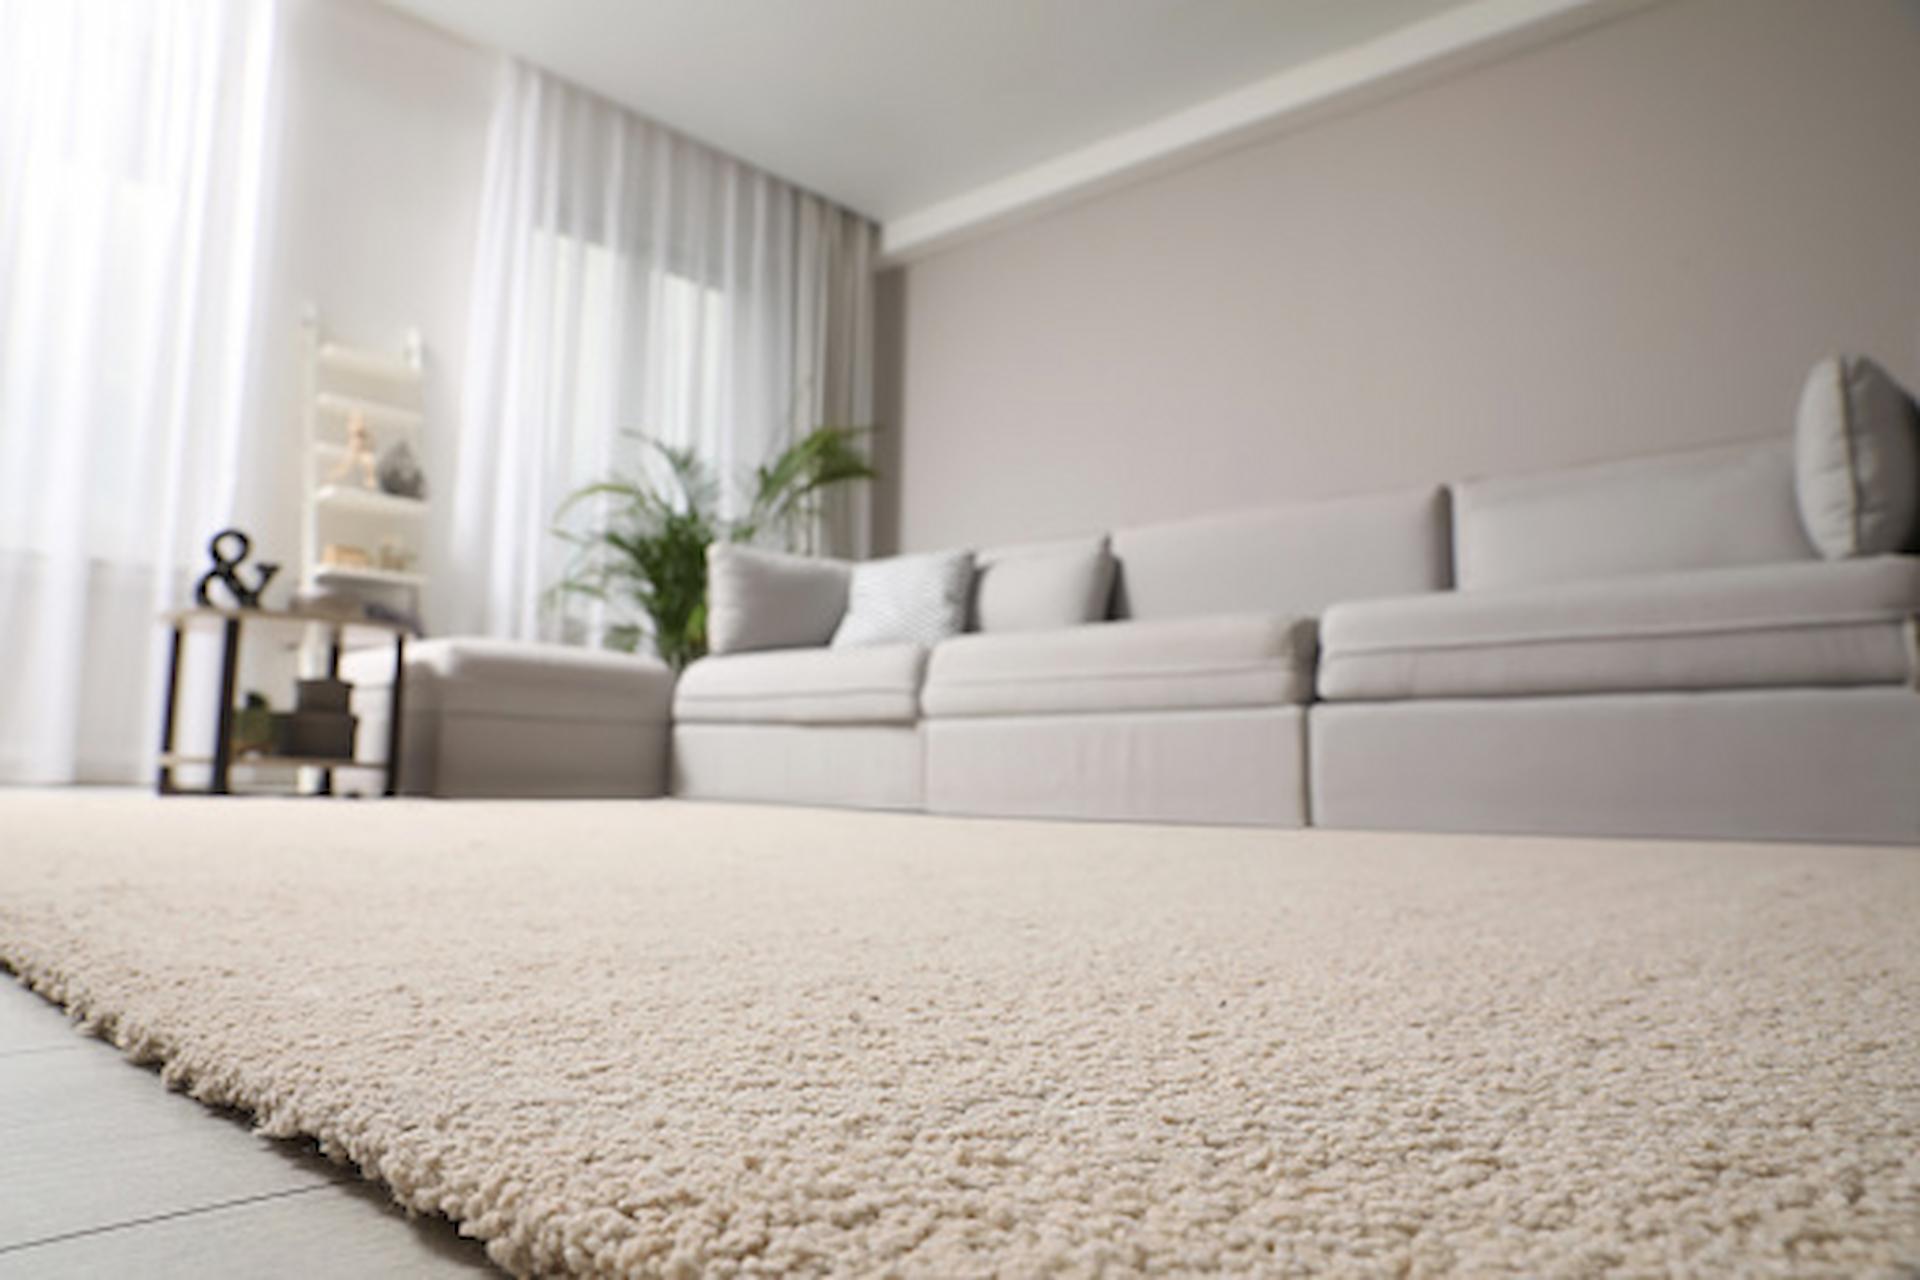 Replacing your carpets